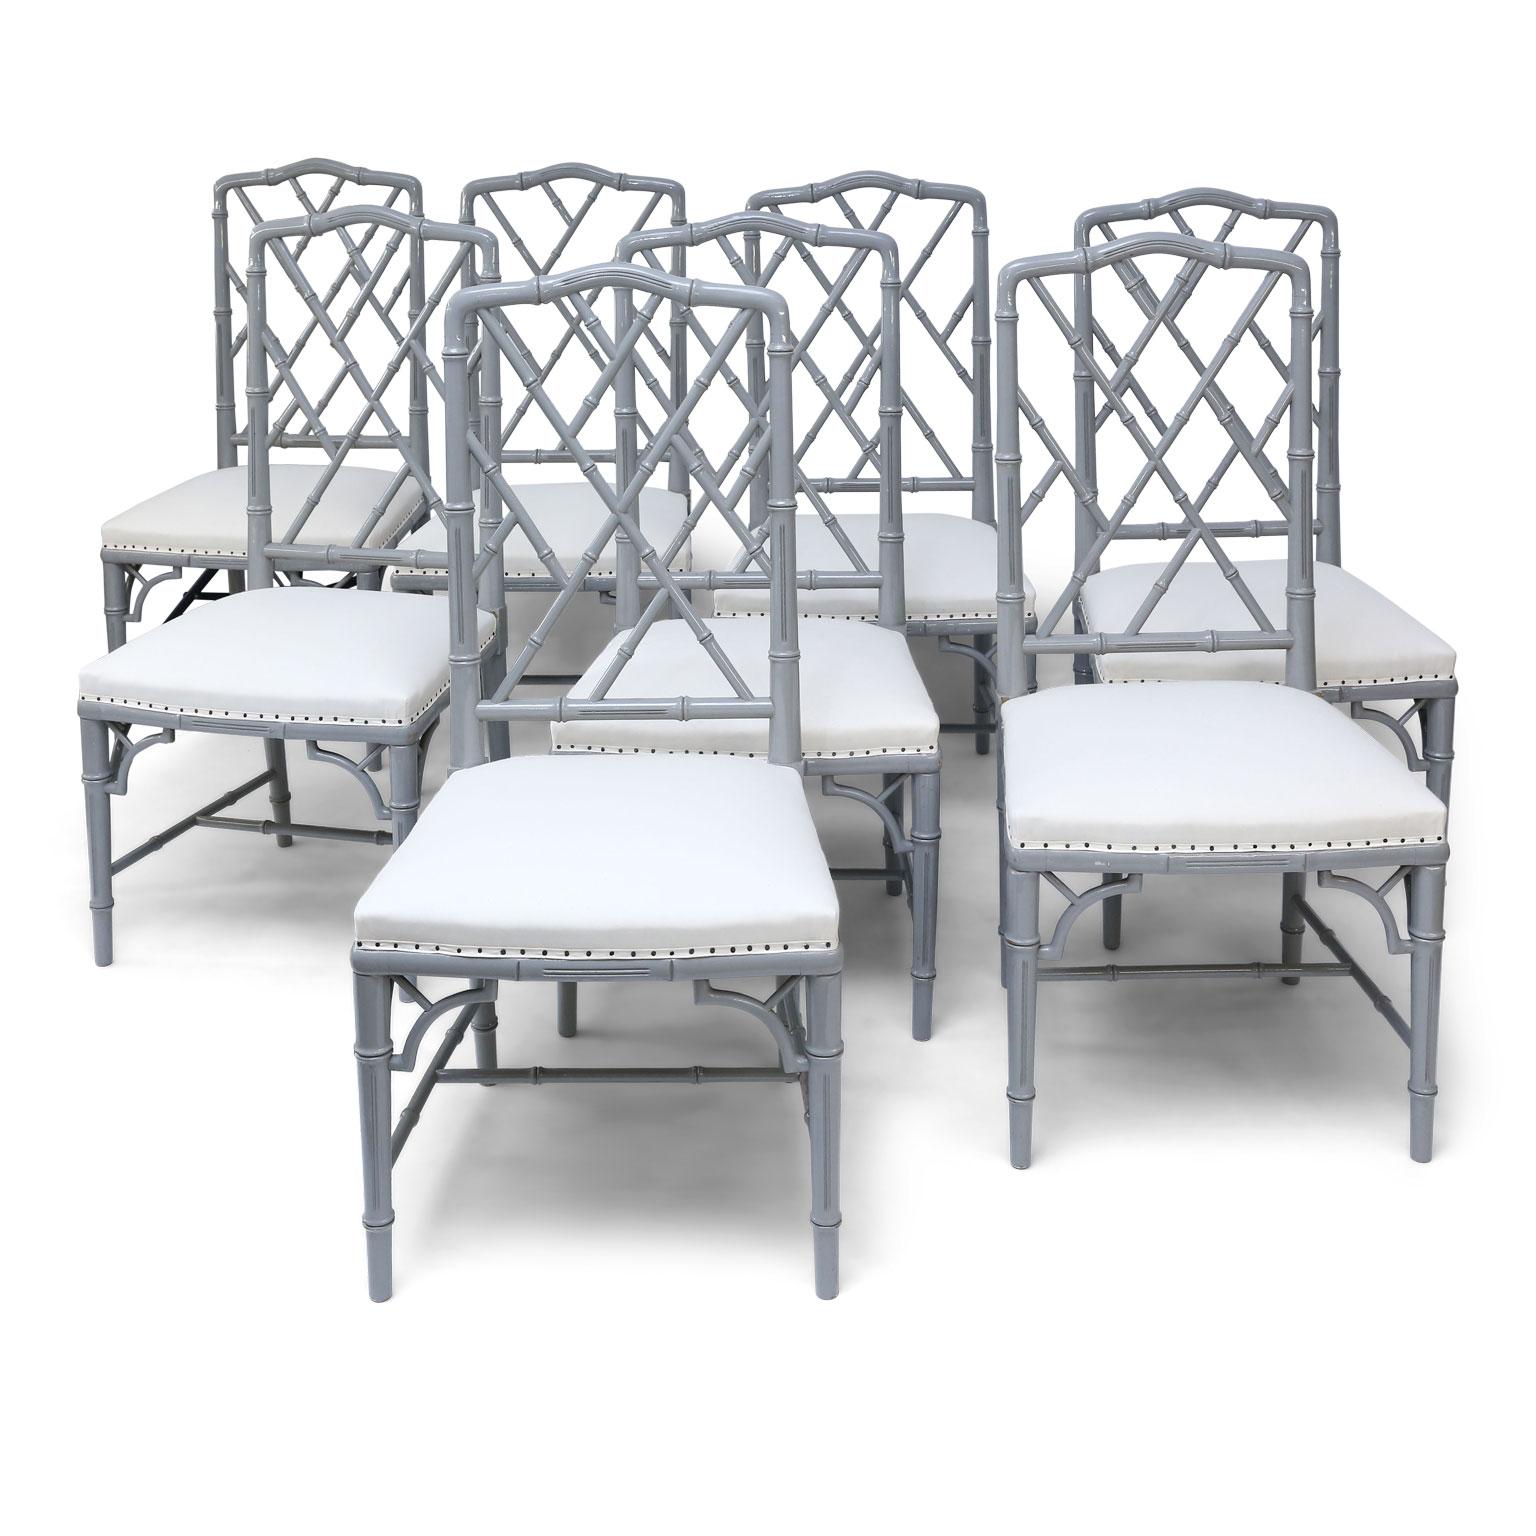 Set of eight-light gray lacquered dining chairs from France, dating to the 1970s. Faux bamboo frames carved in Chippendale style and finished in a warm gray lacquer. Upholstered in white ticking (meant to be covered in your own fabric). Finish is